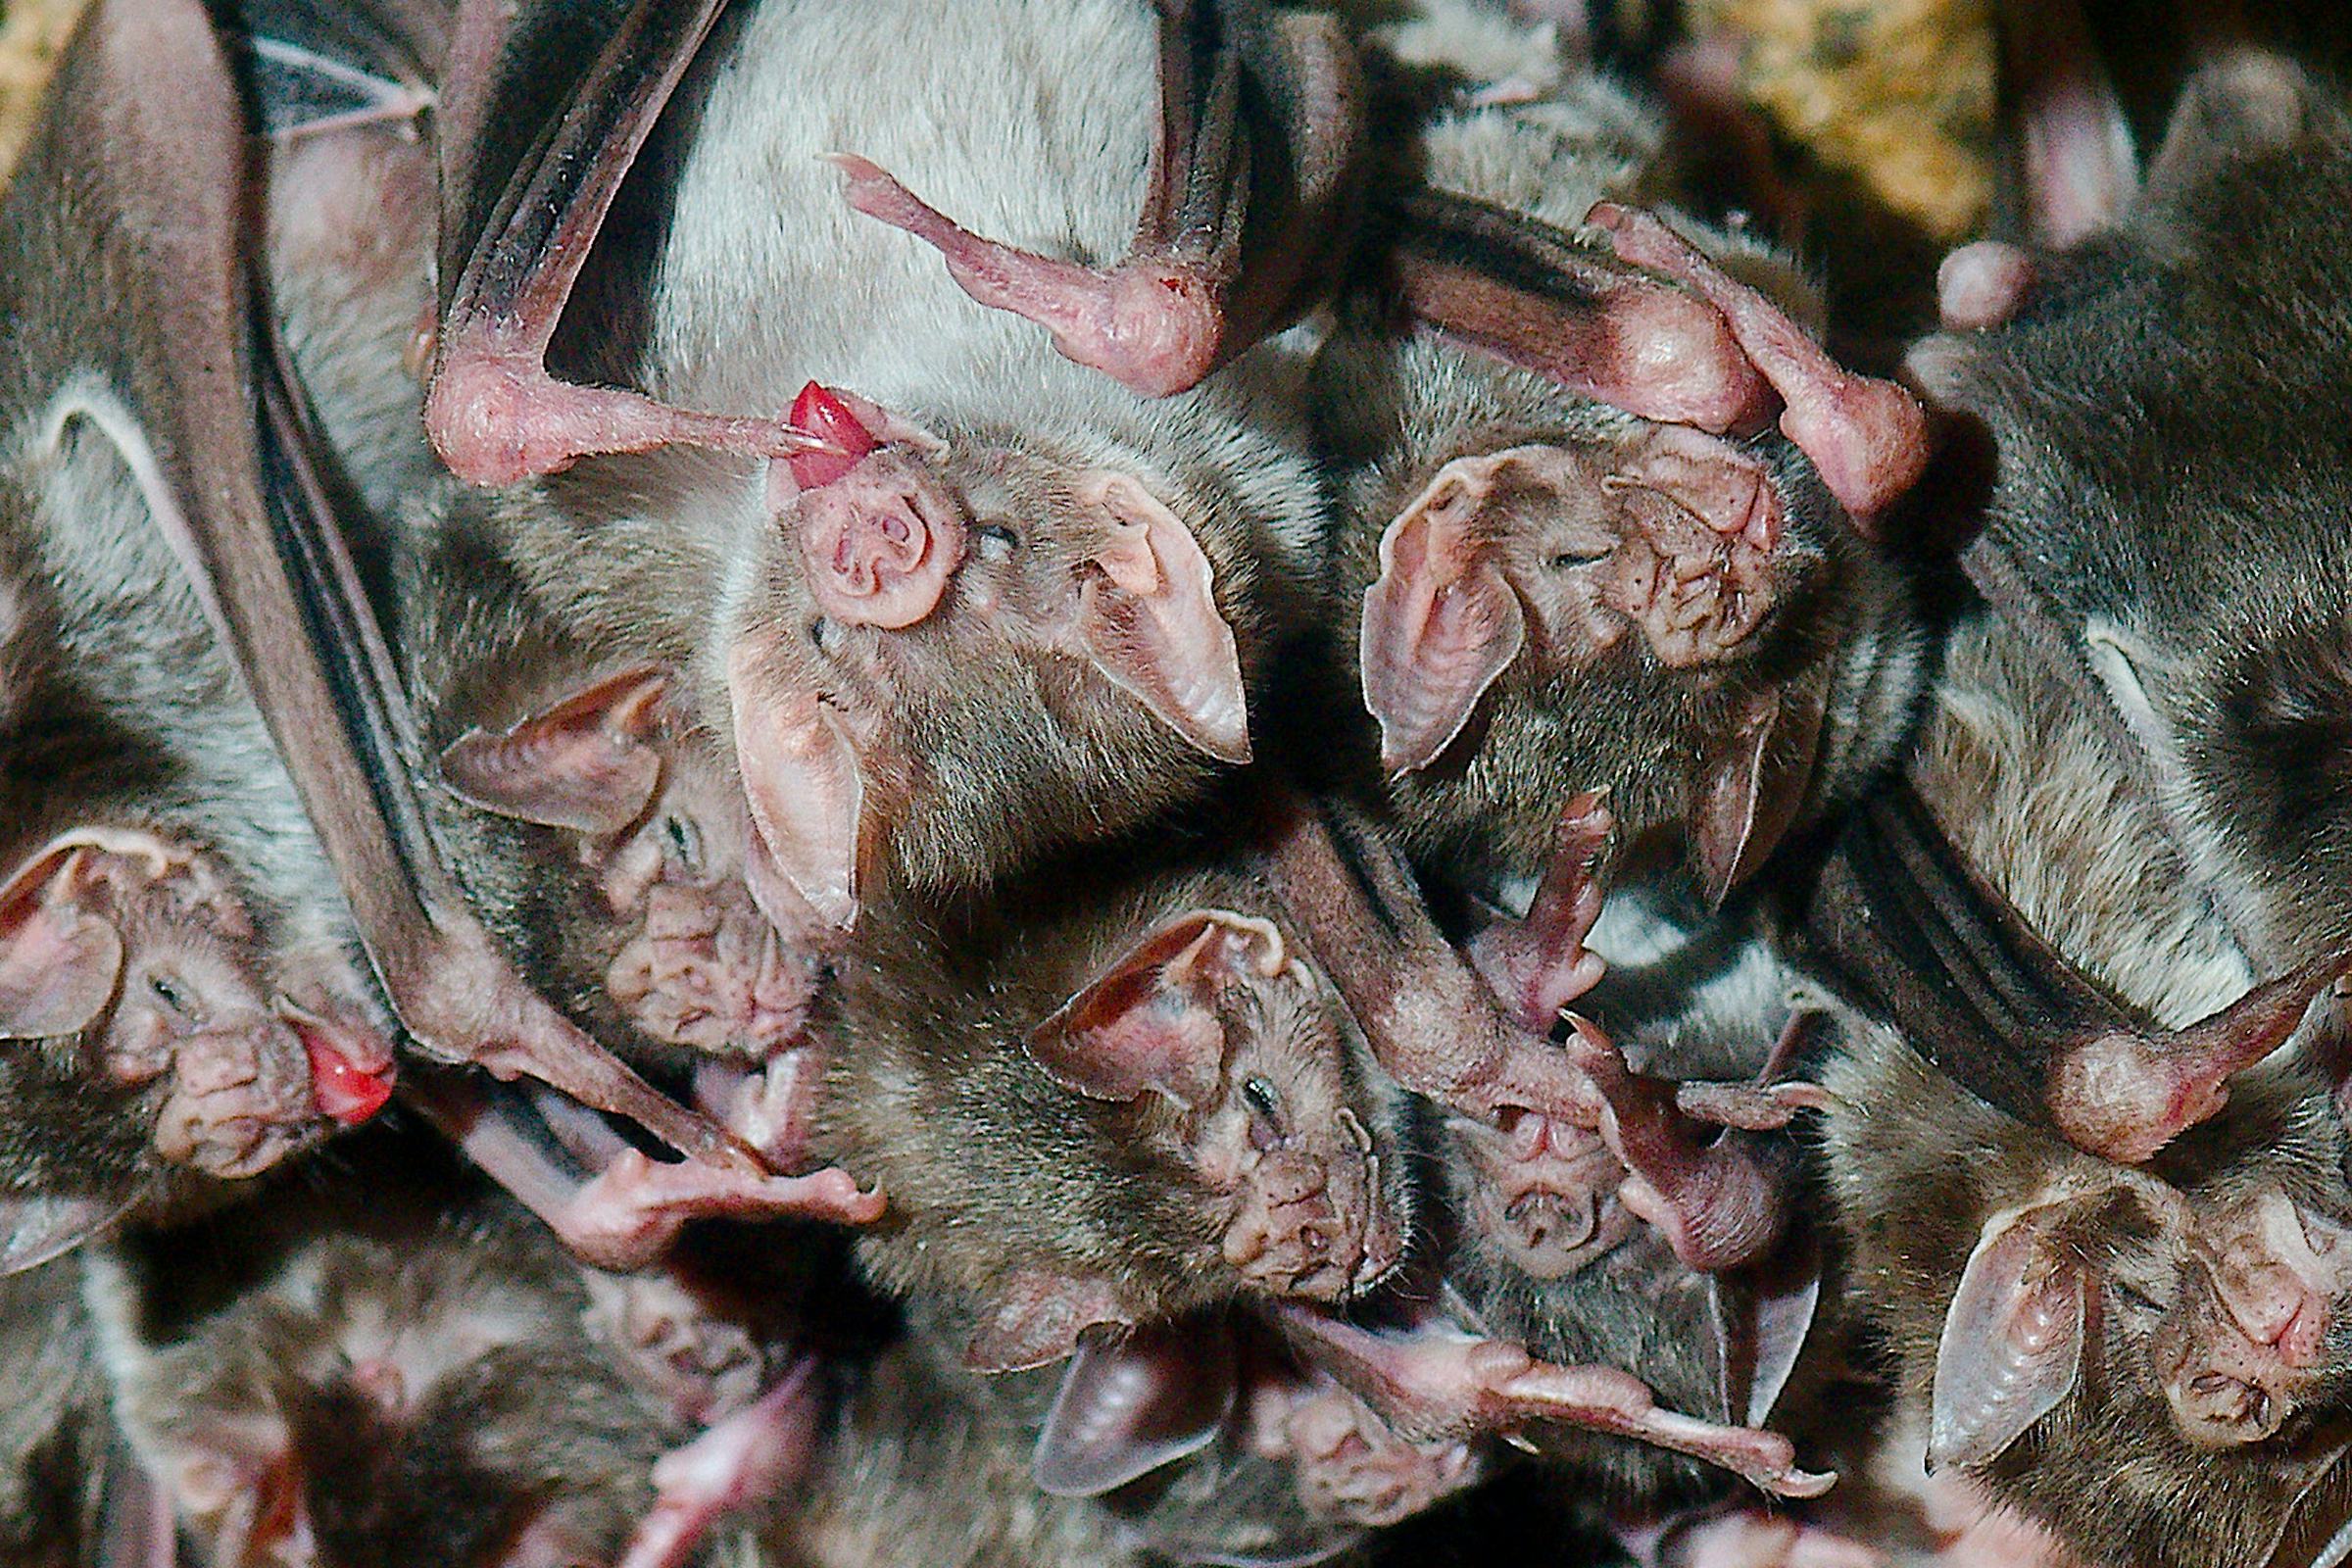 A group of common vampire bats just hanging around